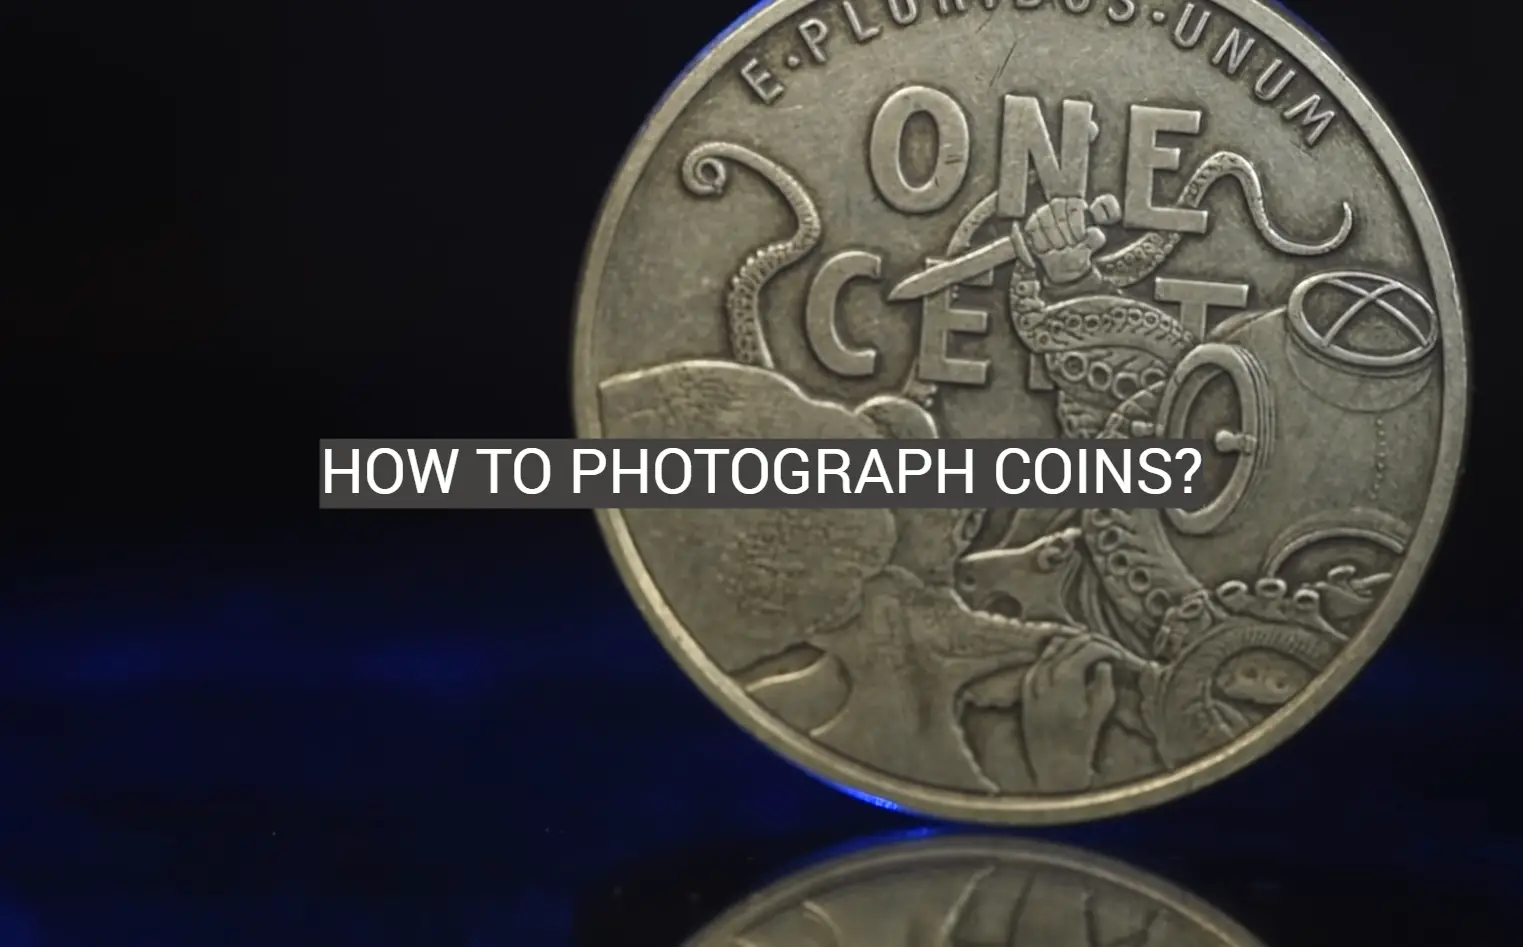 How to Photograph Coins?